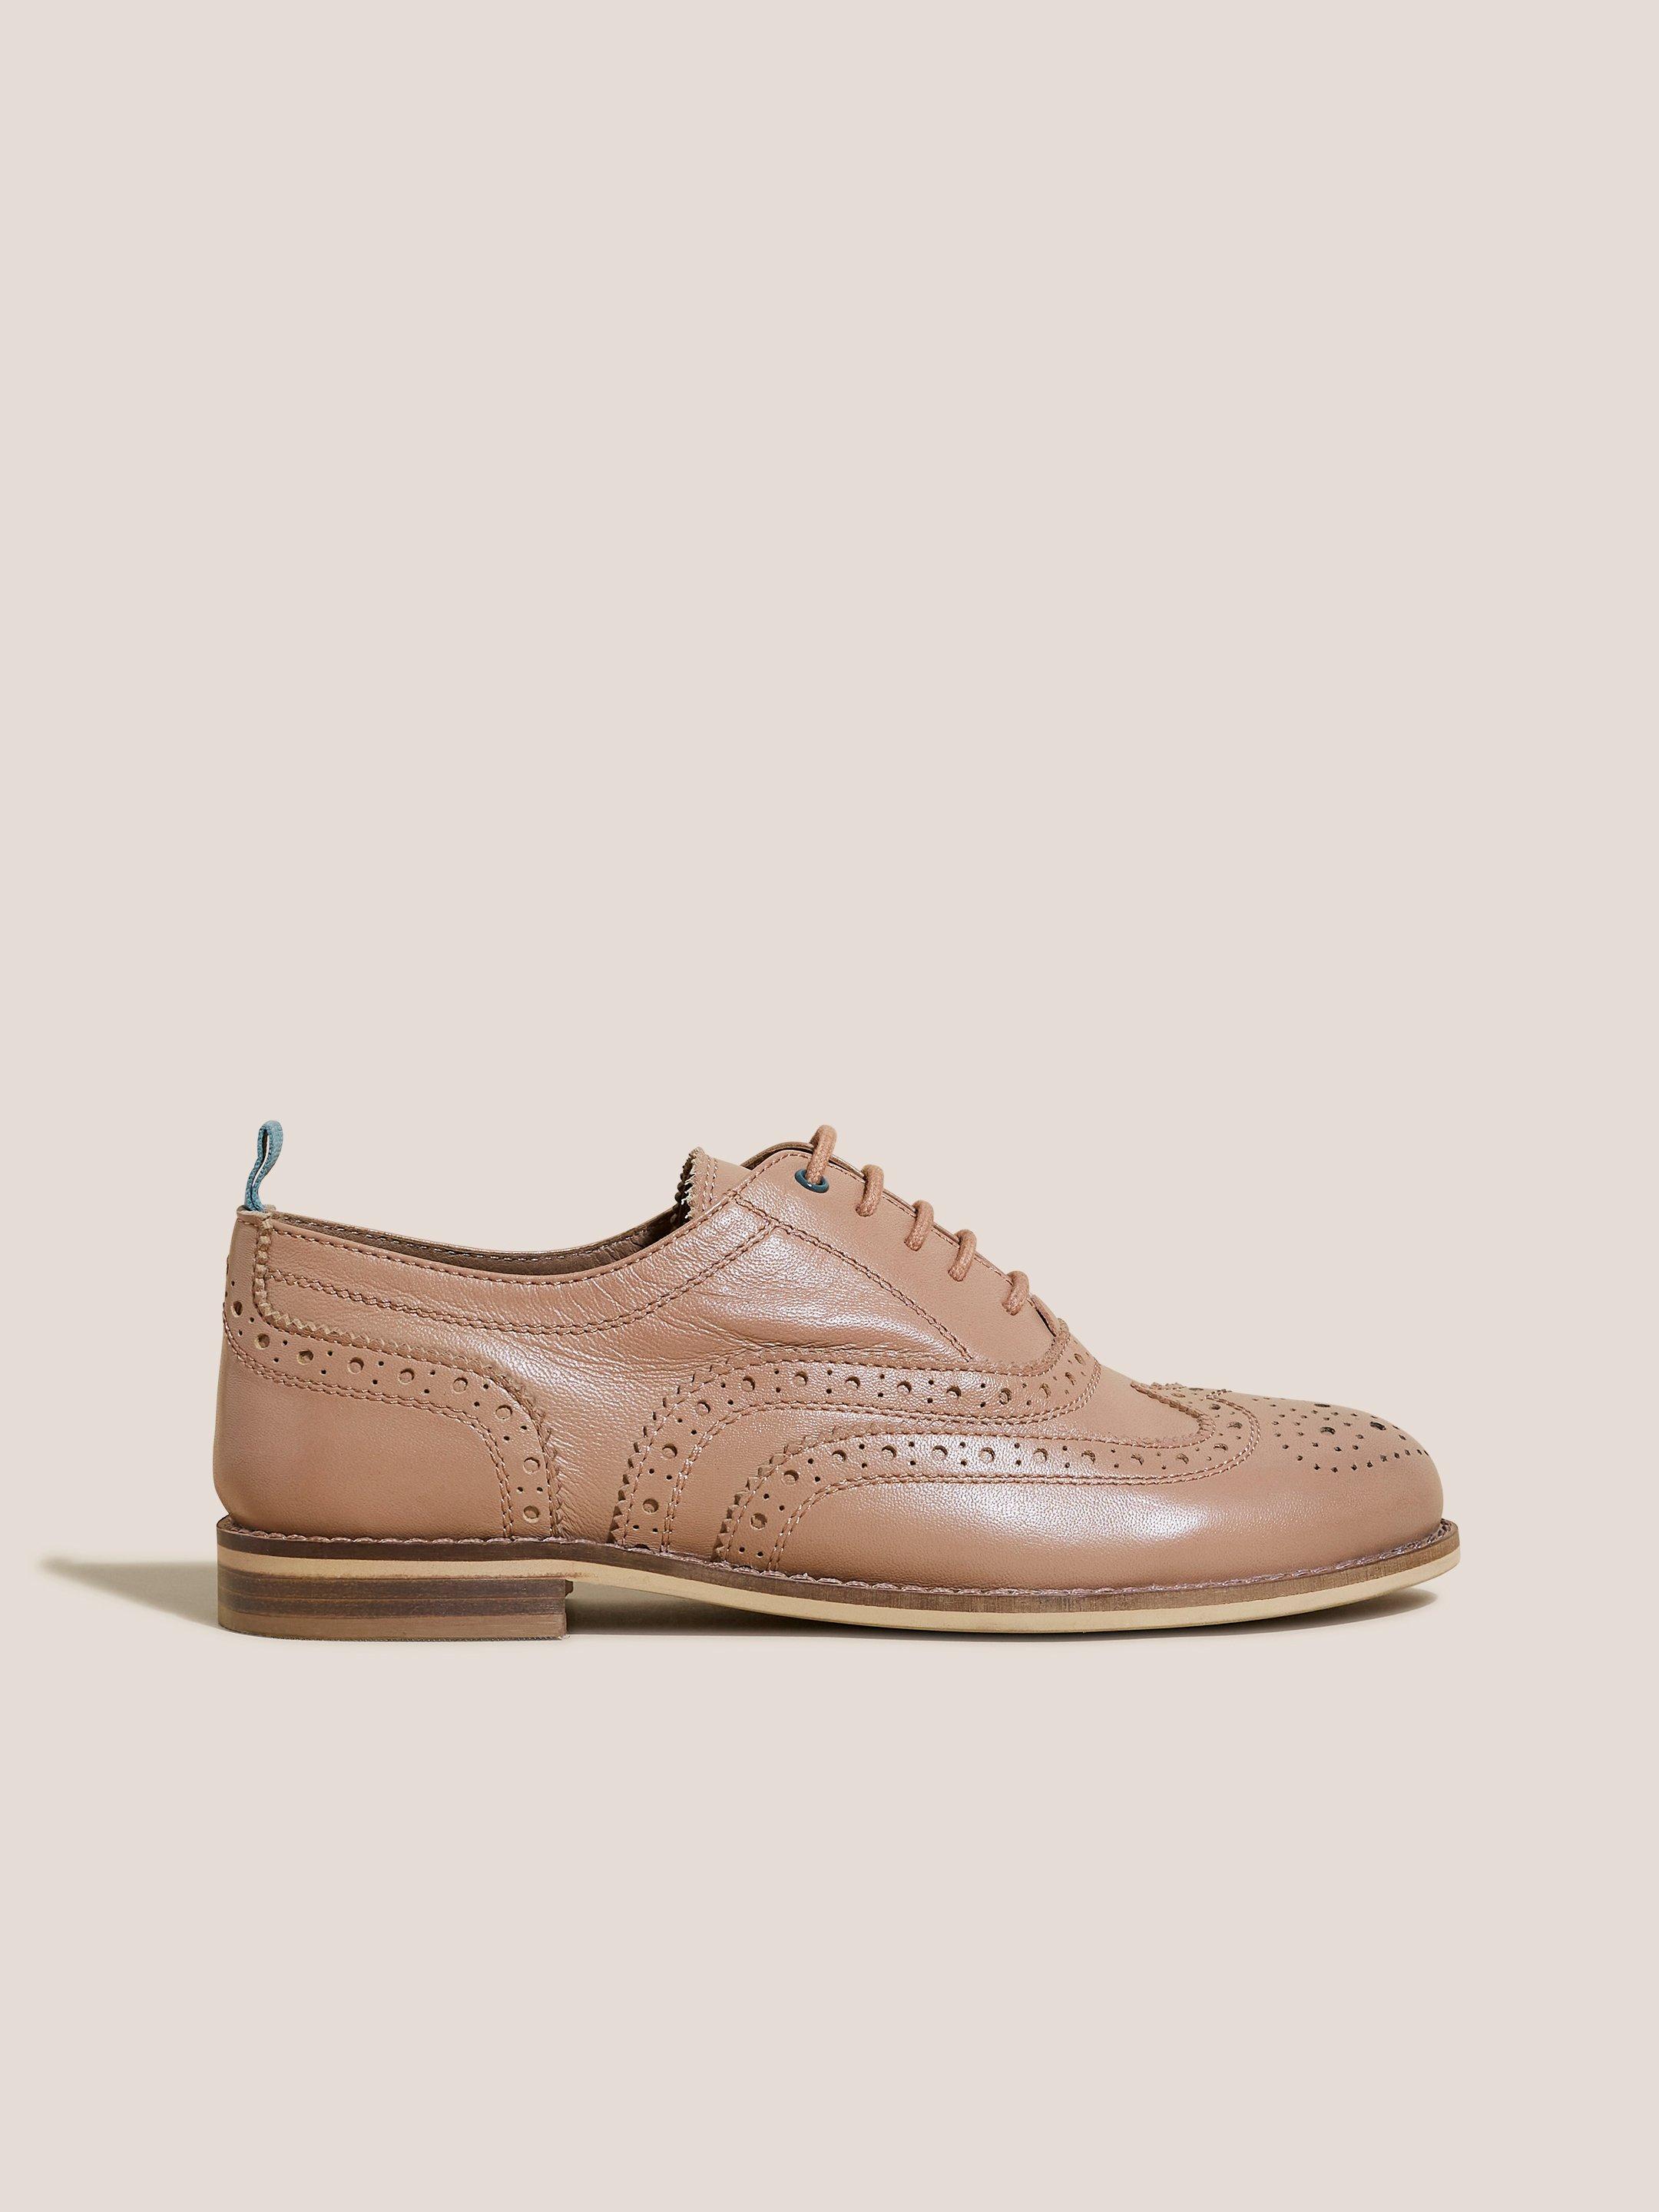 Thistle Lace Up Brogue in PINK MLT - MODEL FRONT